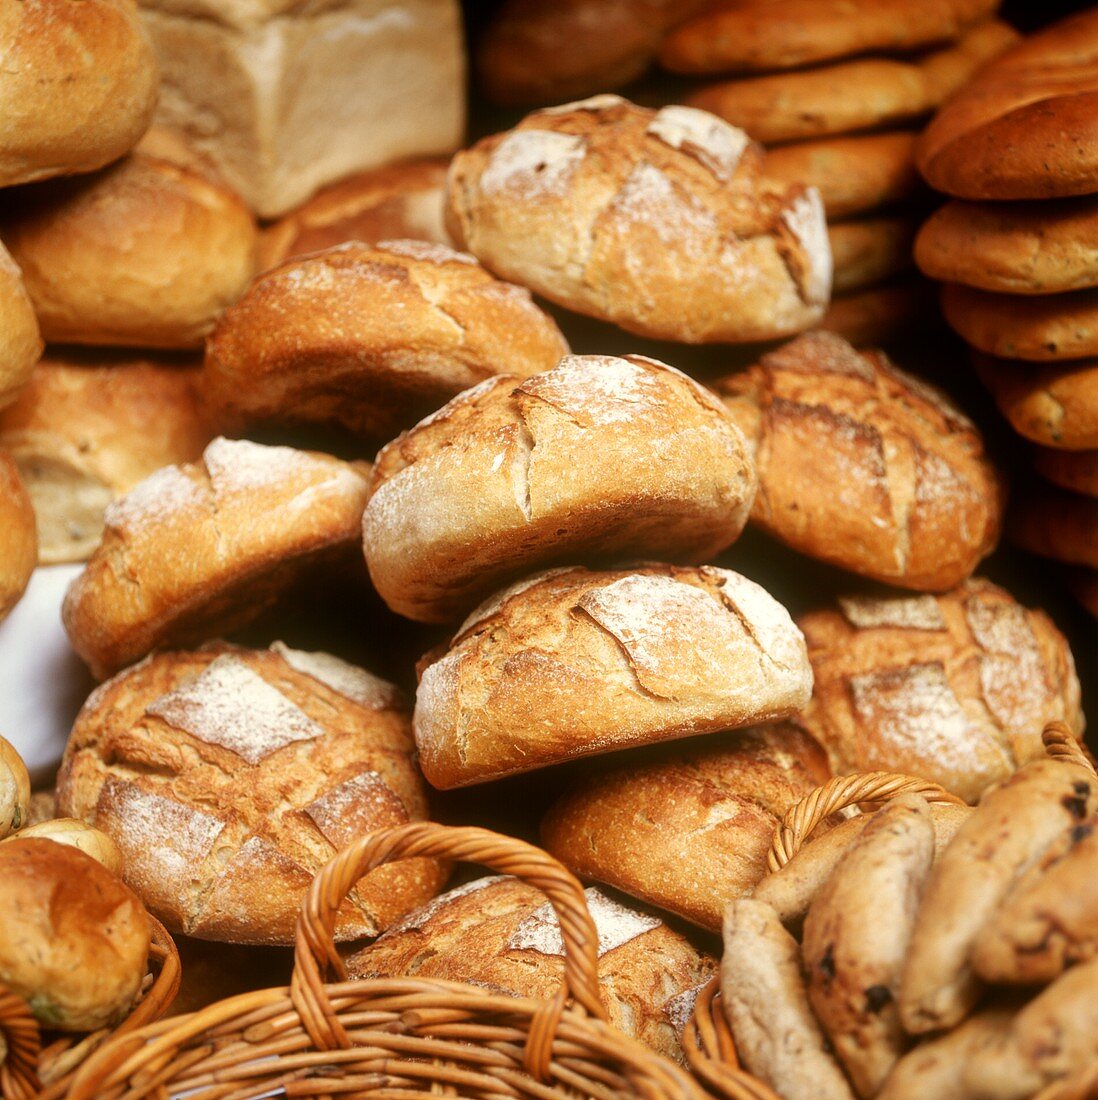 Assorted bread at market